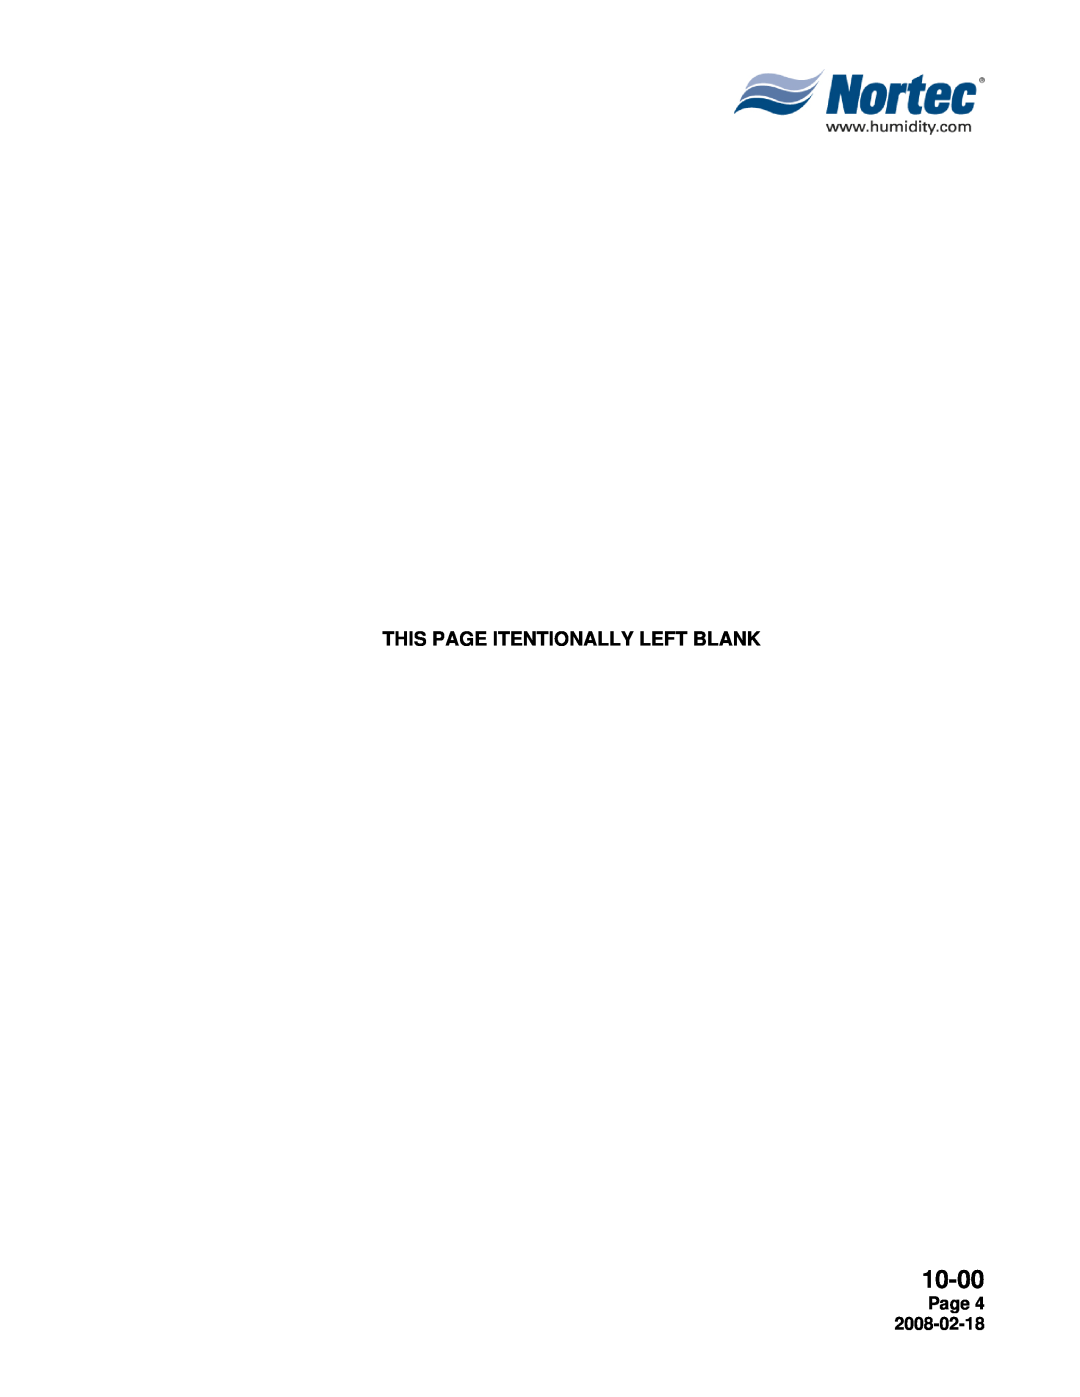 Nortec Industries NHRS Series manual This Page Itentionally Left Blank, 10-00 